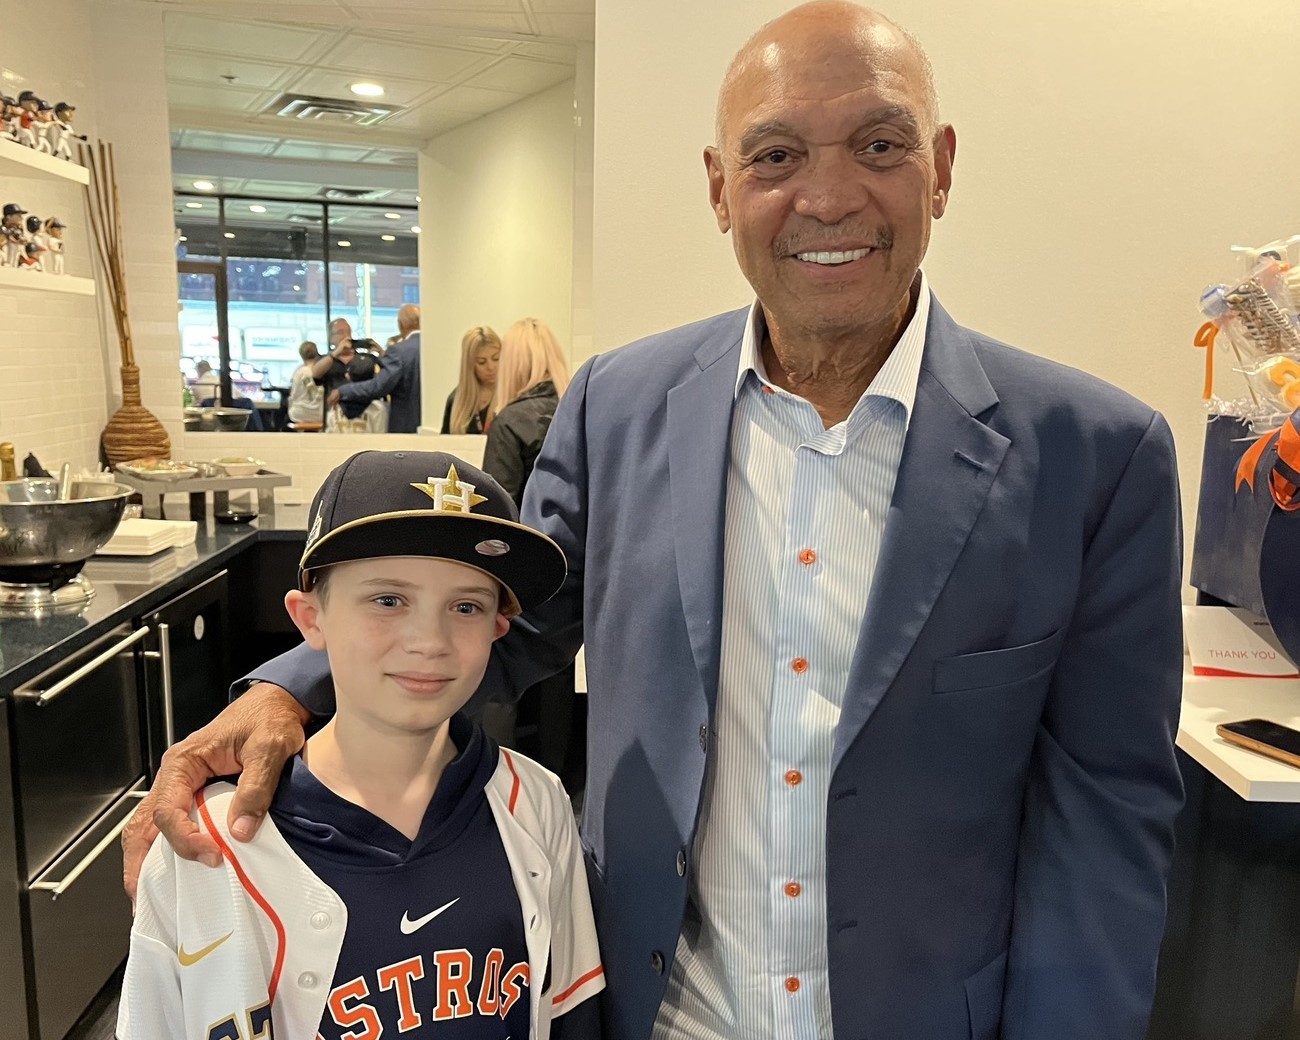 Ex-Yankees great Reggie Jackson with a young Houston Astros fan.